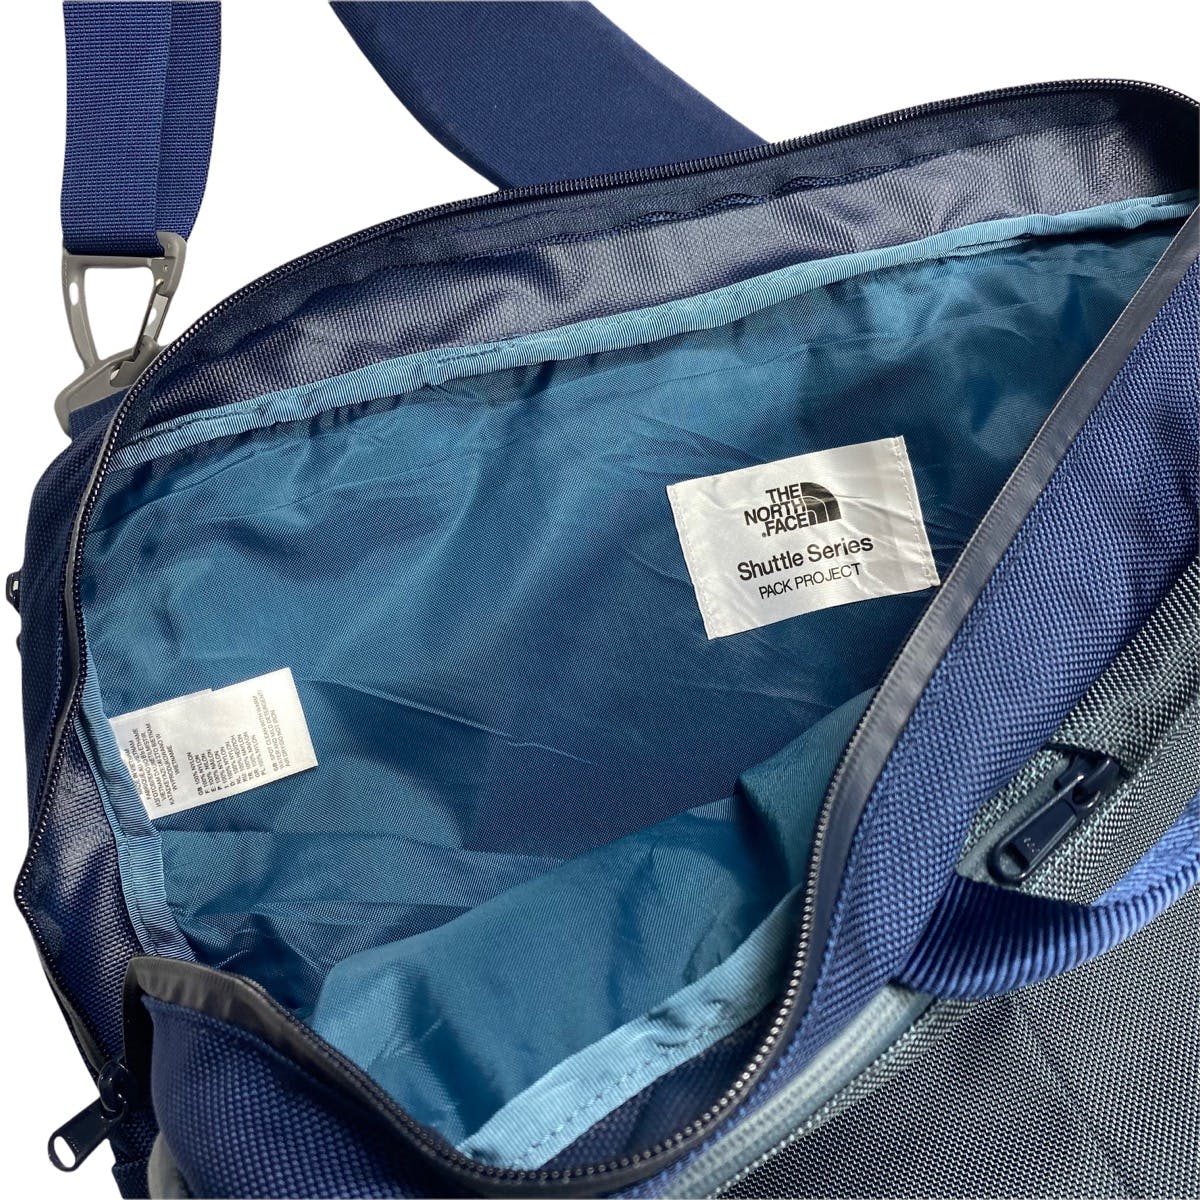 The North Face Shuttle Series Pack Project Messenger Bag - 10